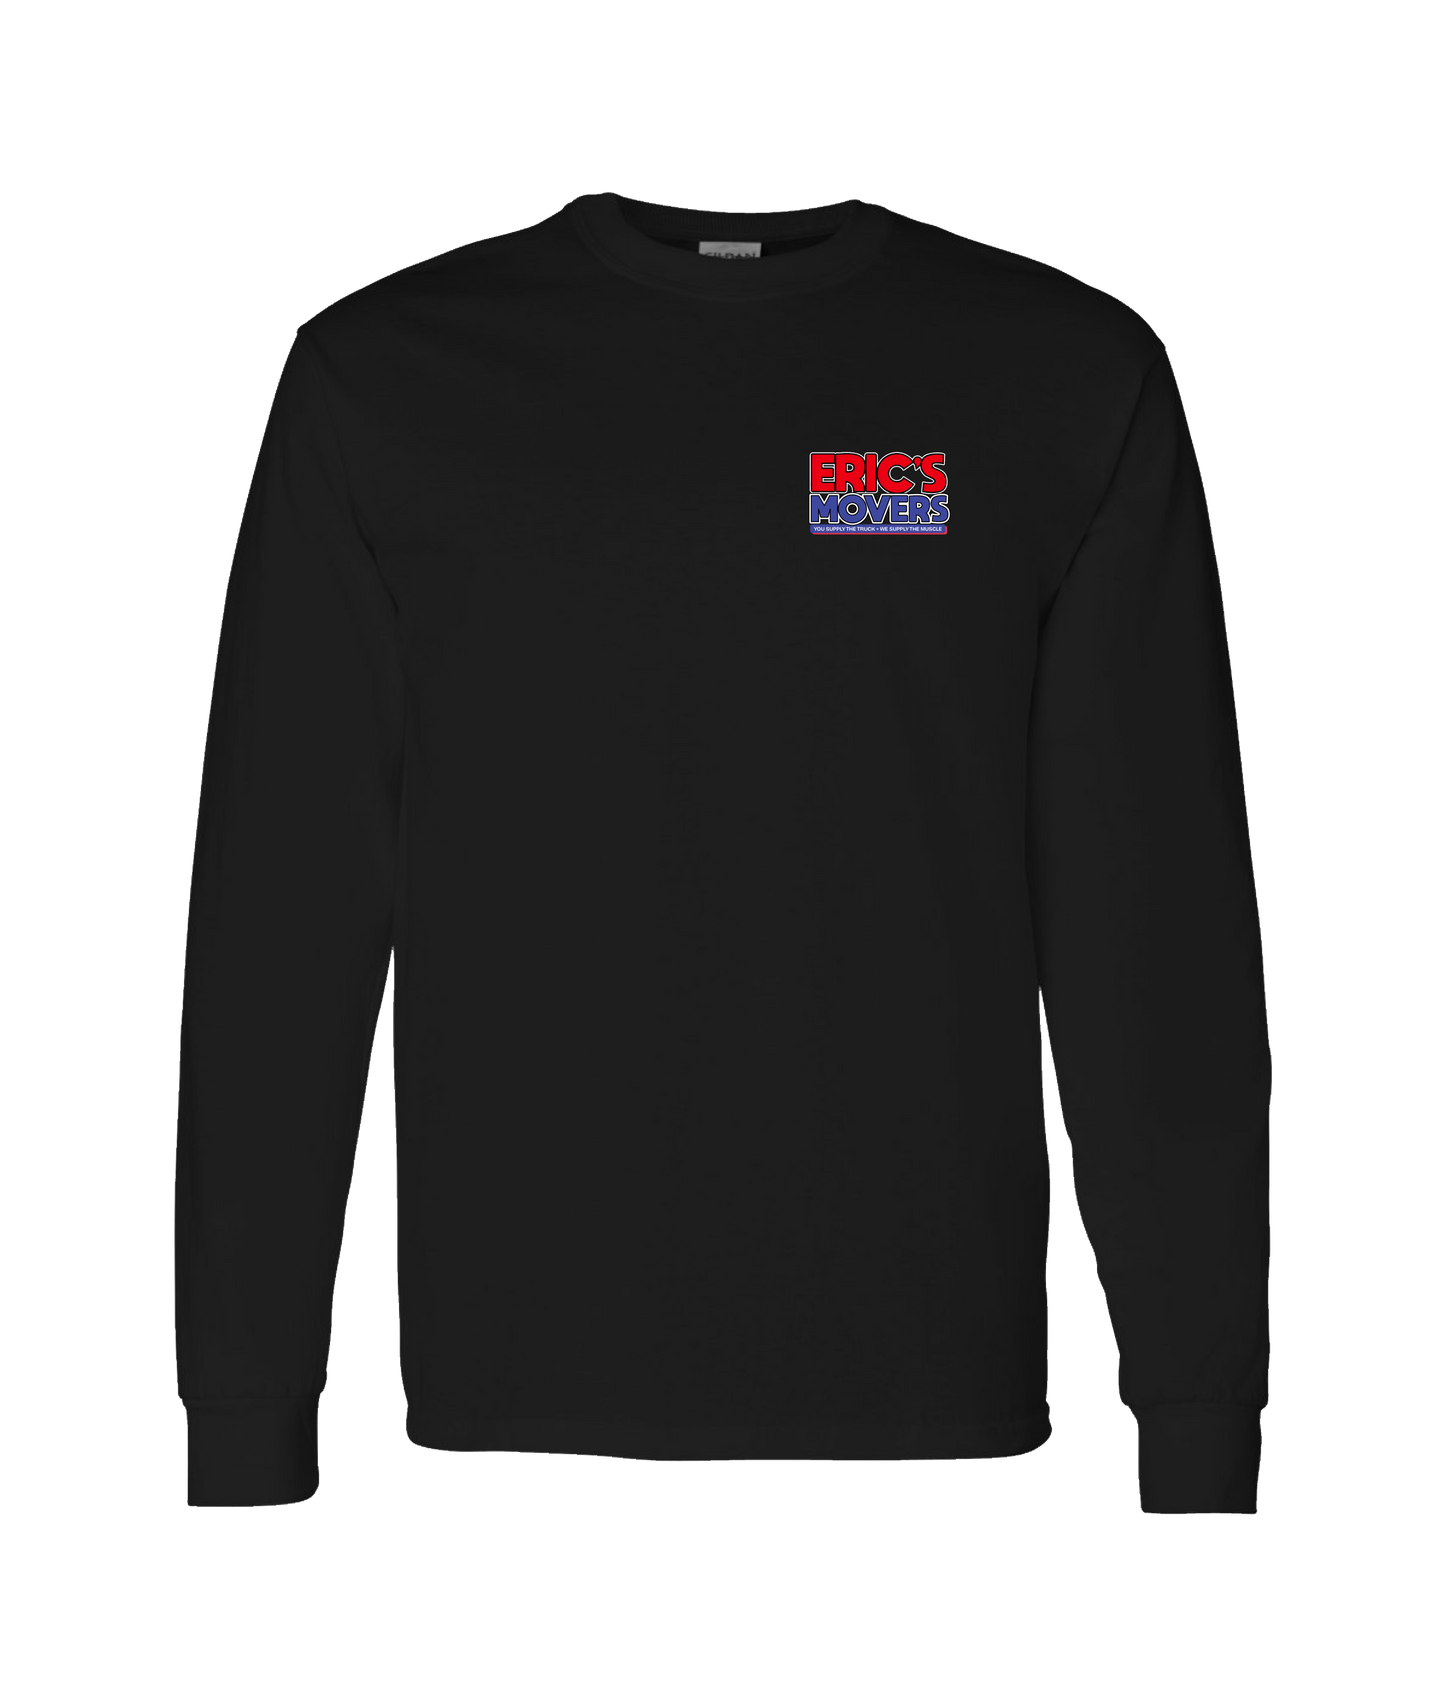 Eric's Movers - $75 an Hour  - Black Long Sleeve T